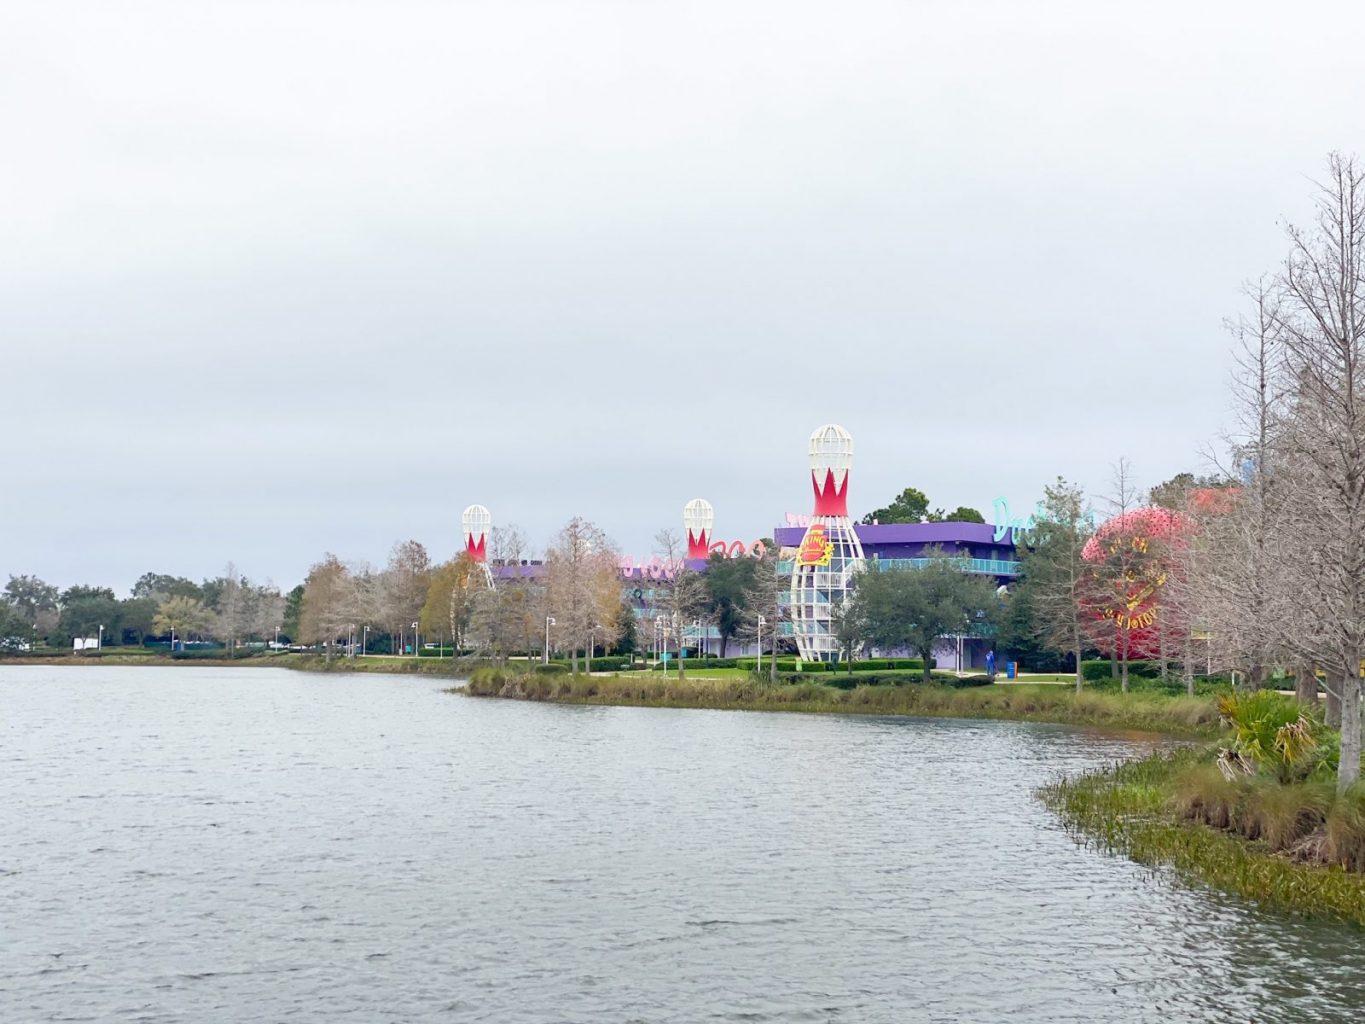 view of Hourglass Lake with Pop Century 50's section in the background